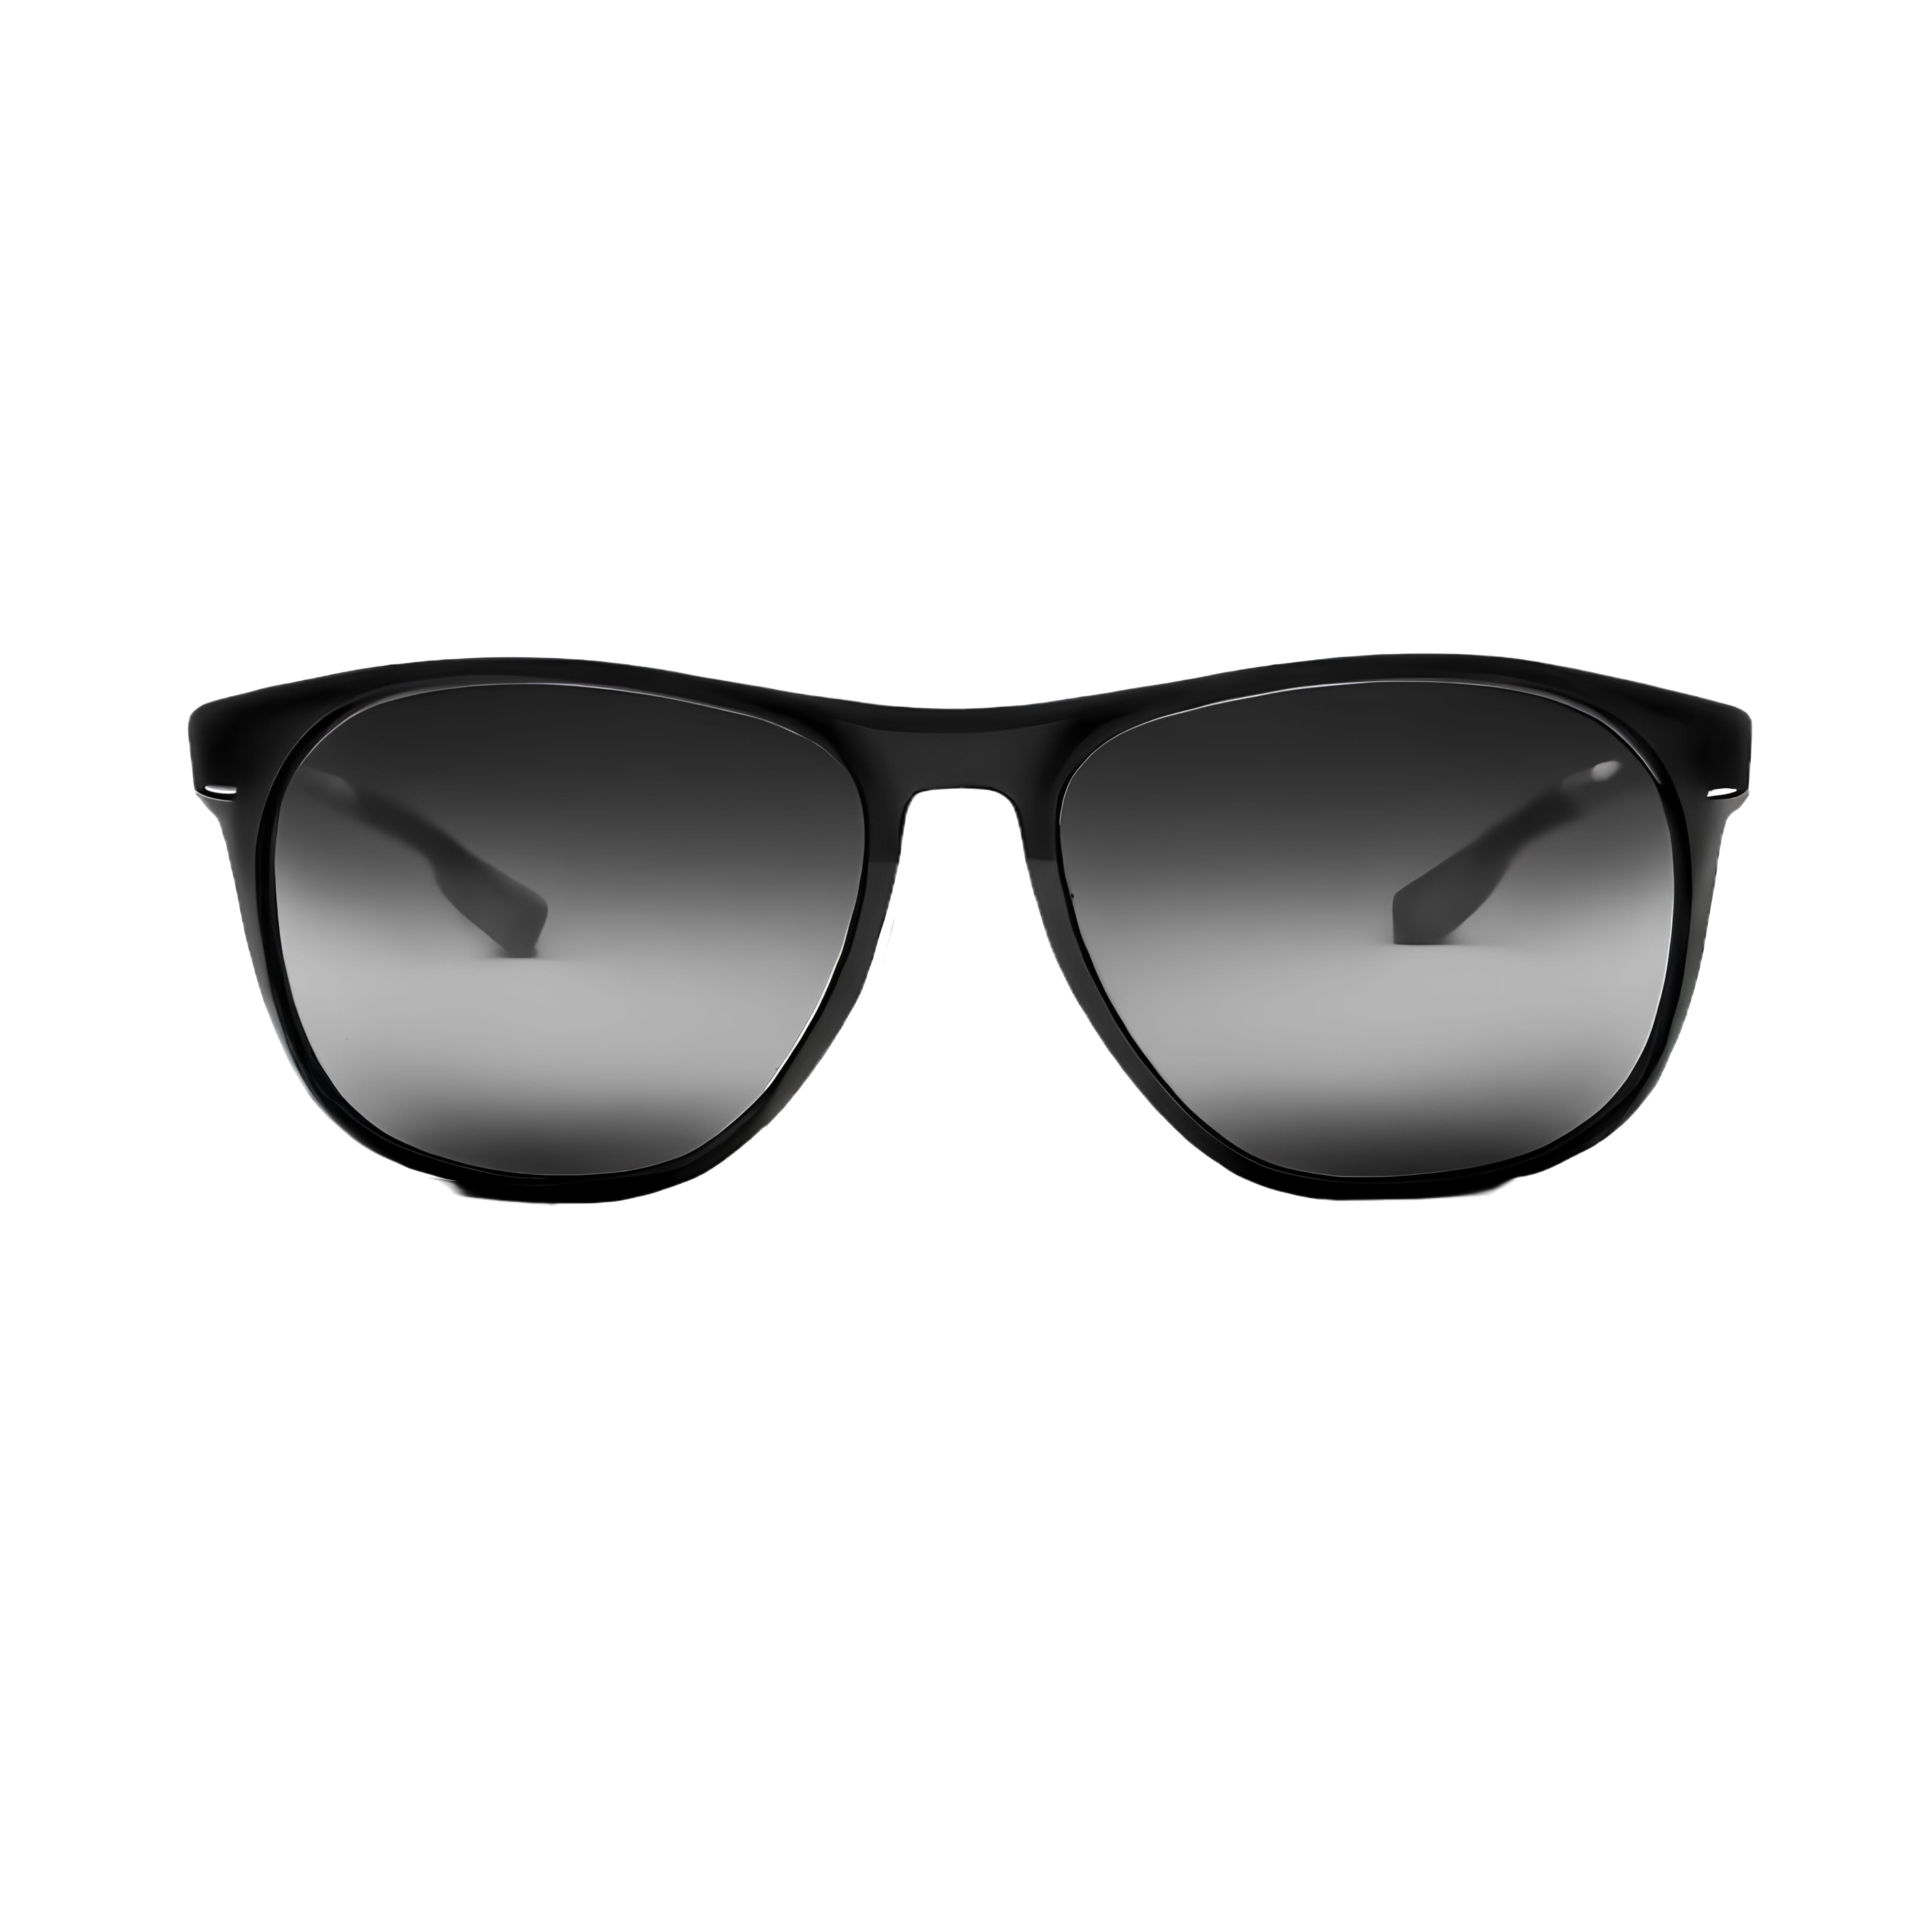 Black sunglasses isolated on transparent background with an empty space ...